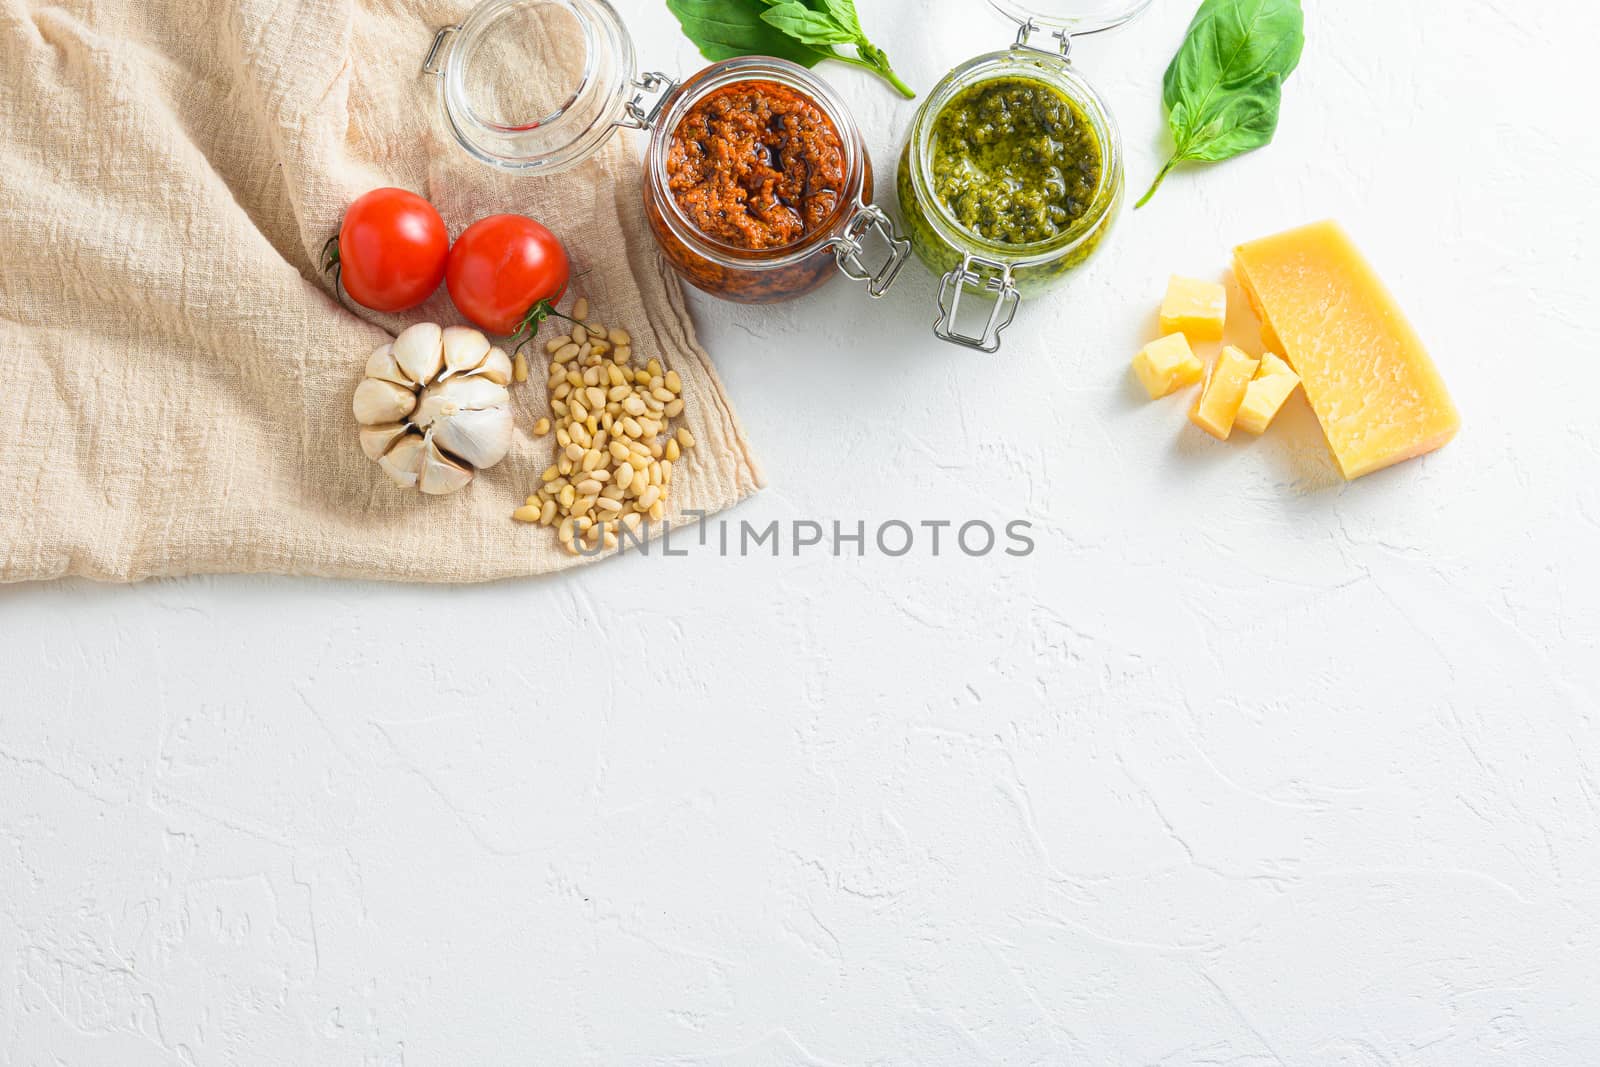 red pesto and green pesto Glass jars with cooking italian recipe ingredients Parmesan cheese, basil leaves, pine nuts, olive oil, garlic, salt, tomatoes top view on white textured concrete surface space for text. by Ilianesolenyi